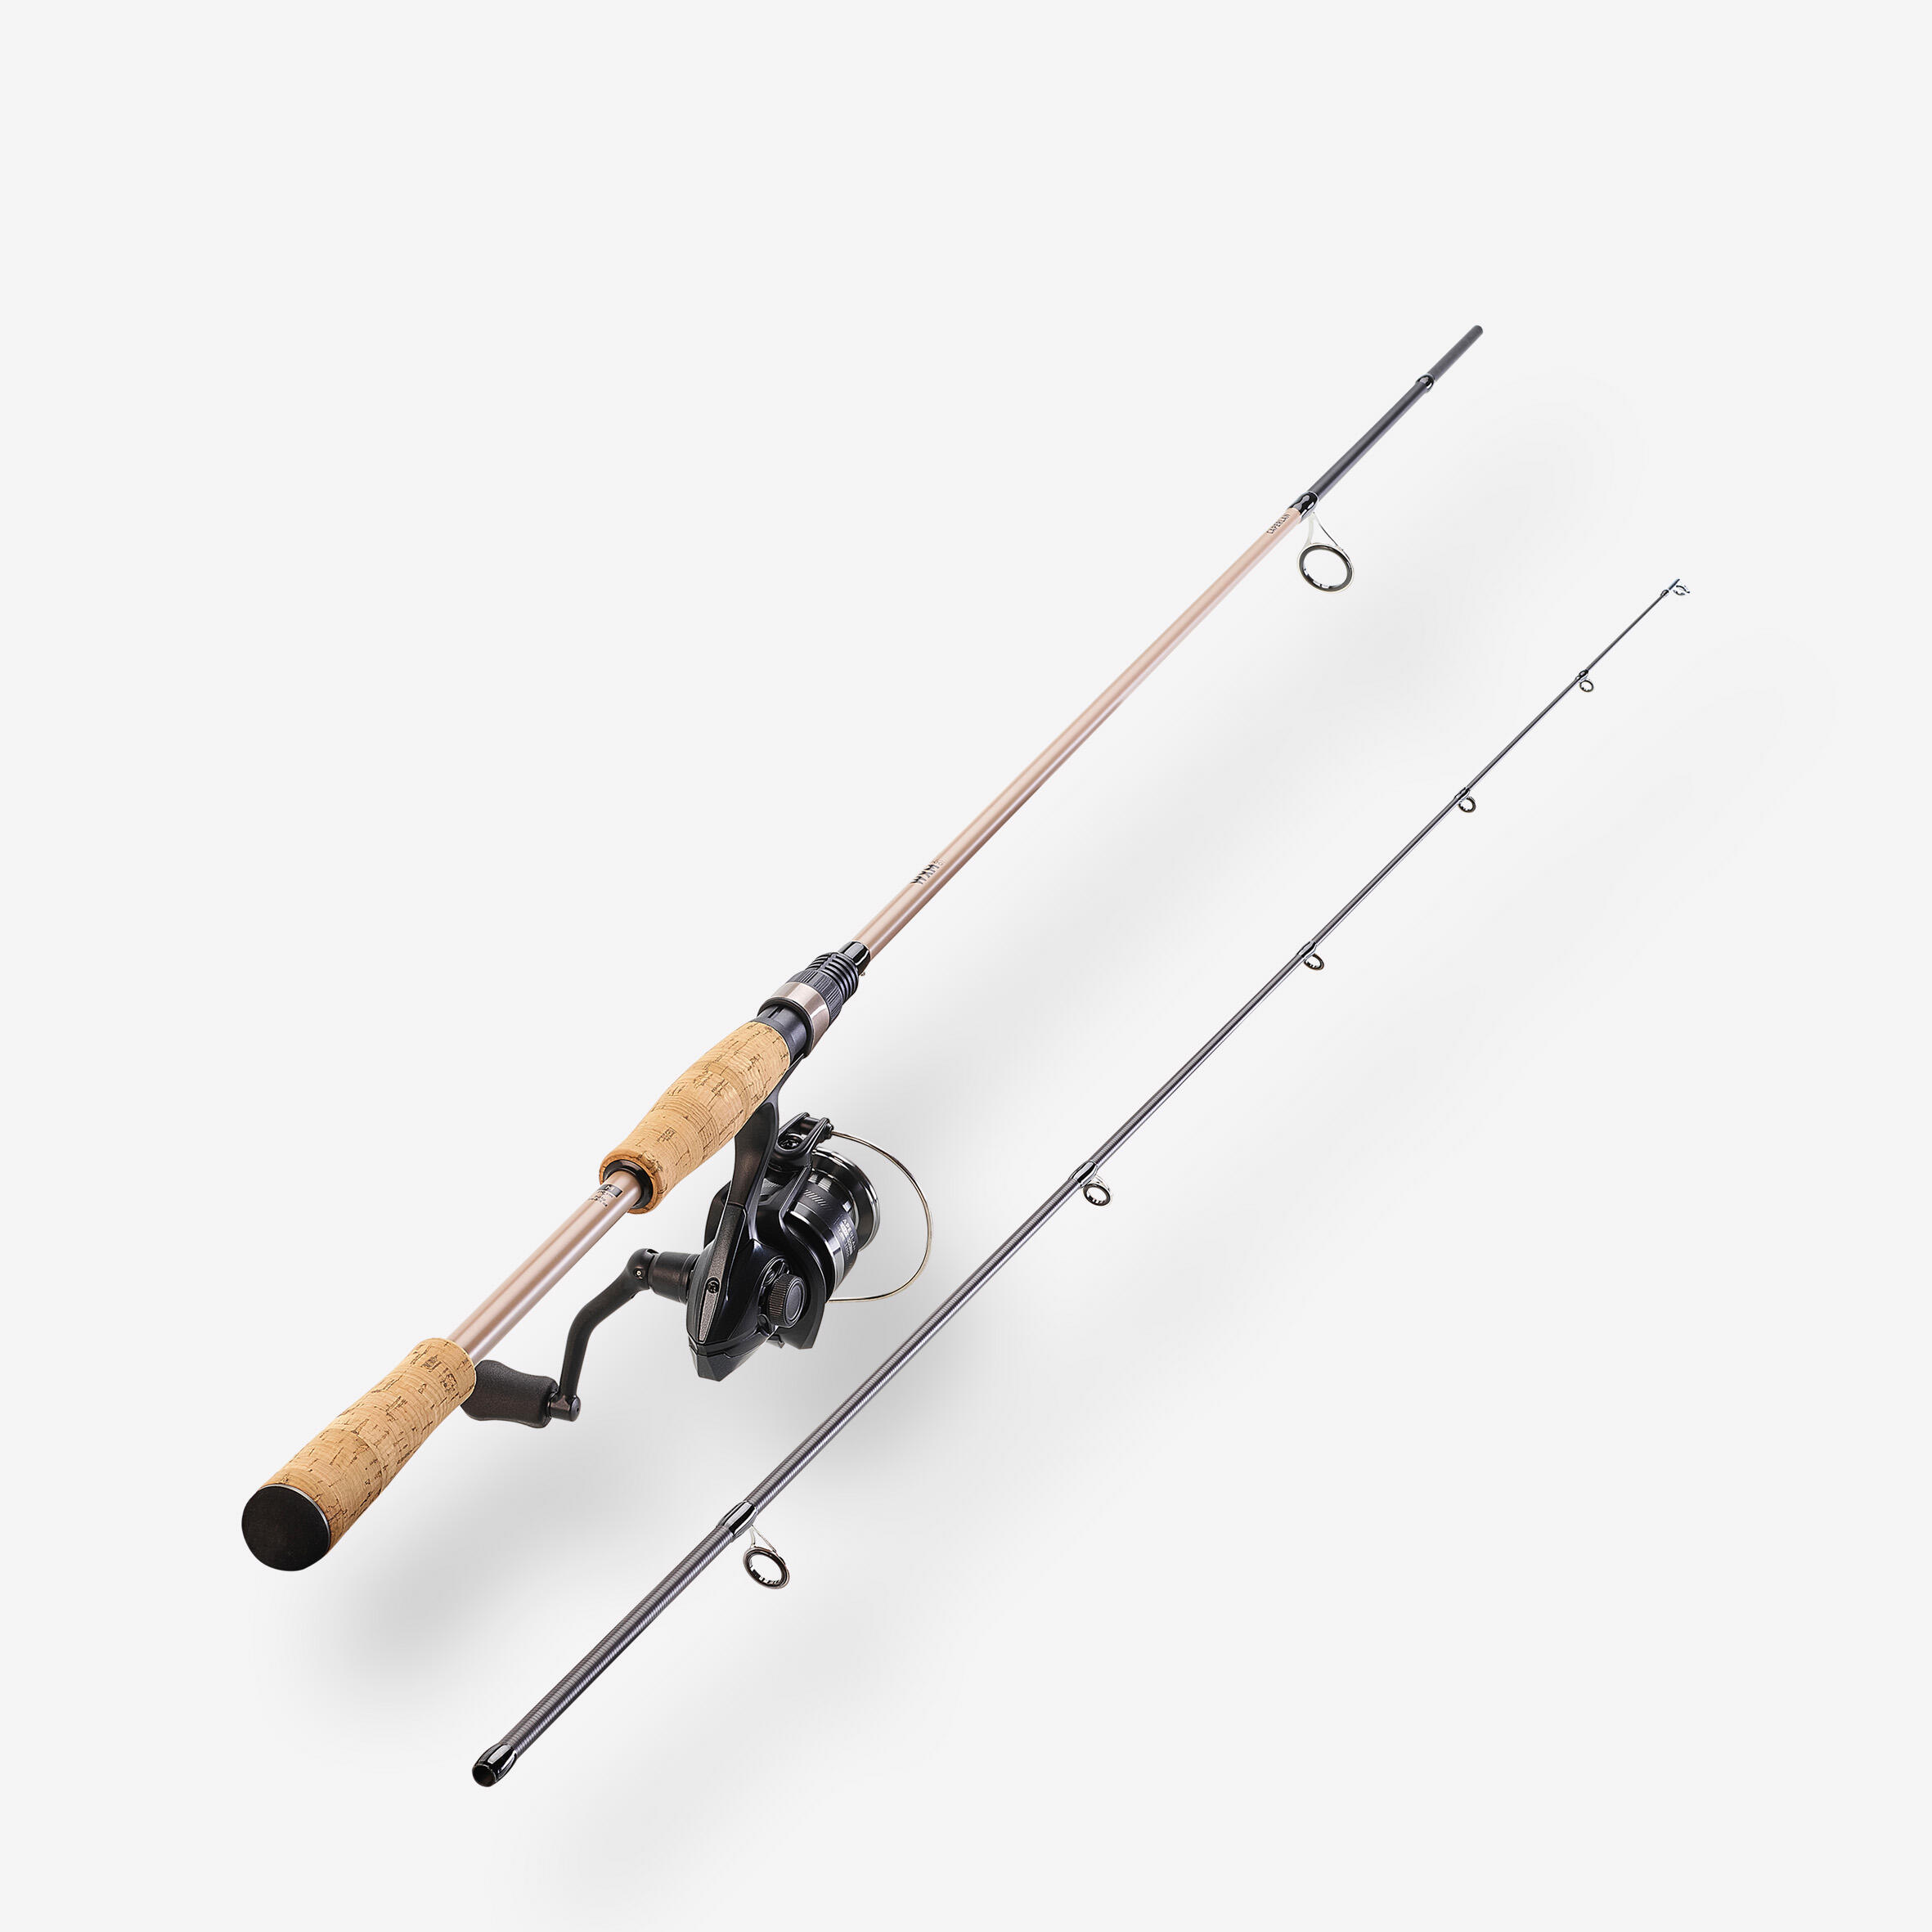 58cm Winter fishing Rod Reel Combos carbon Spinning Ice fishing rod and  reel set Children's beginner fishing rod Fishing Tackle